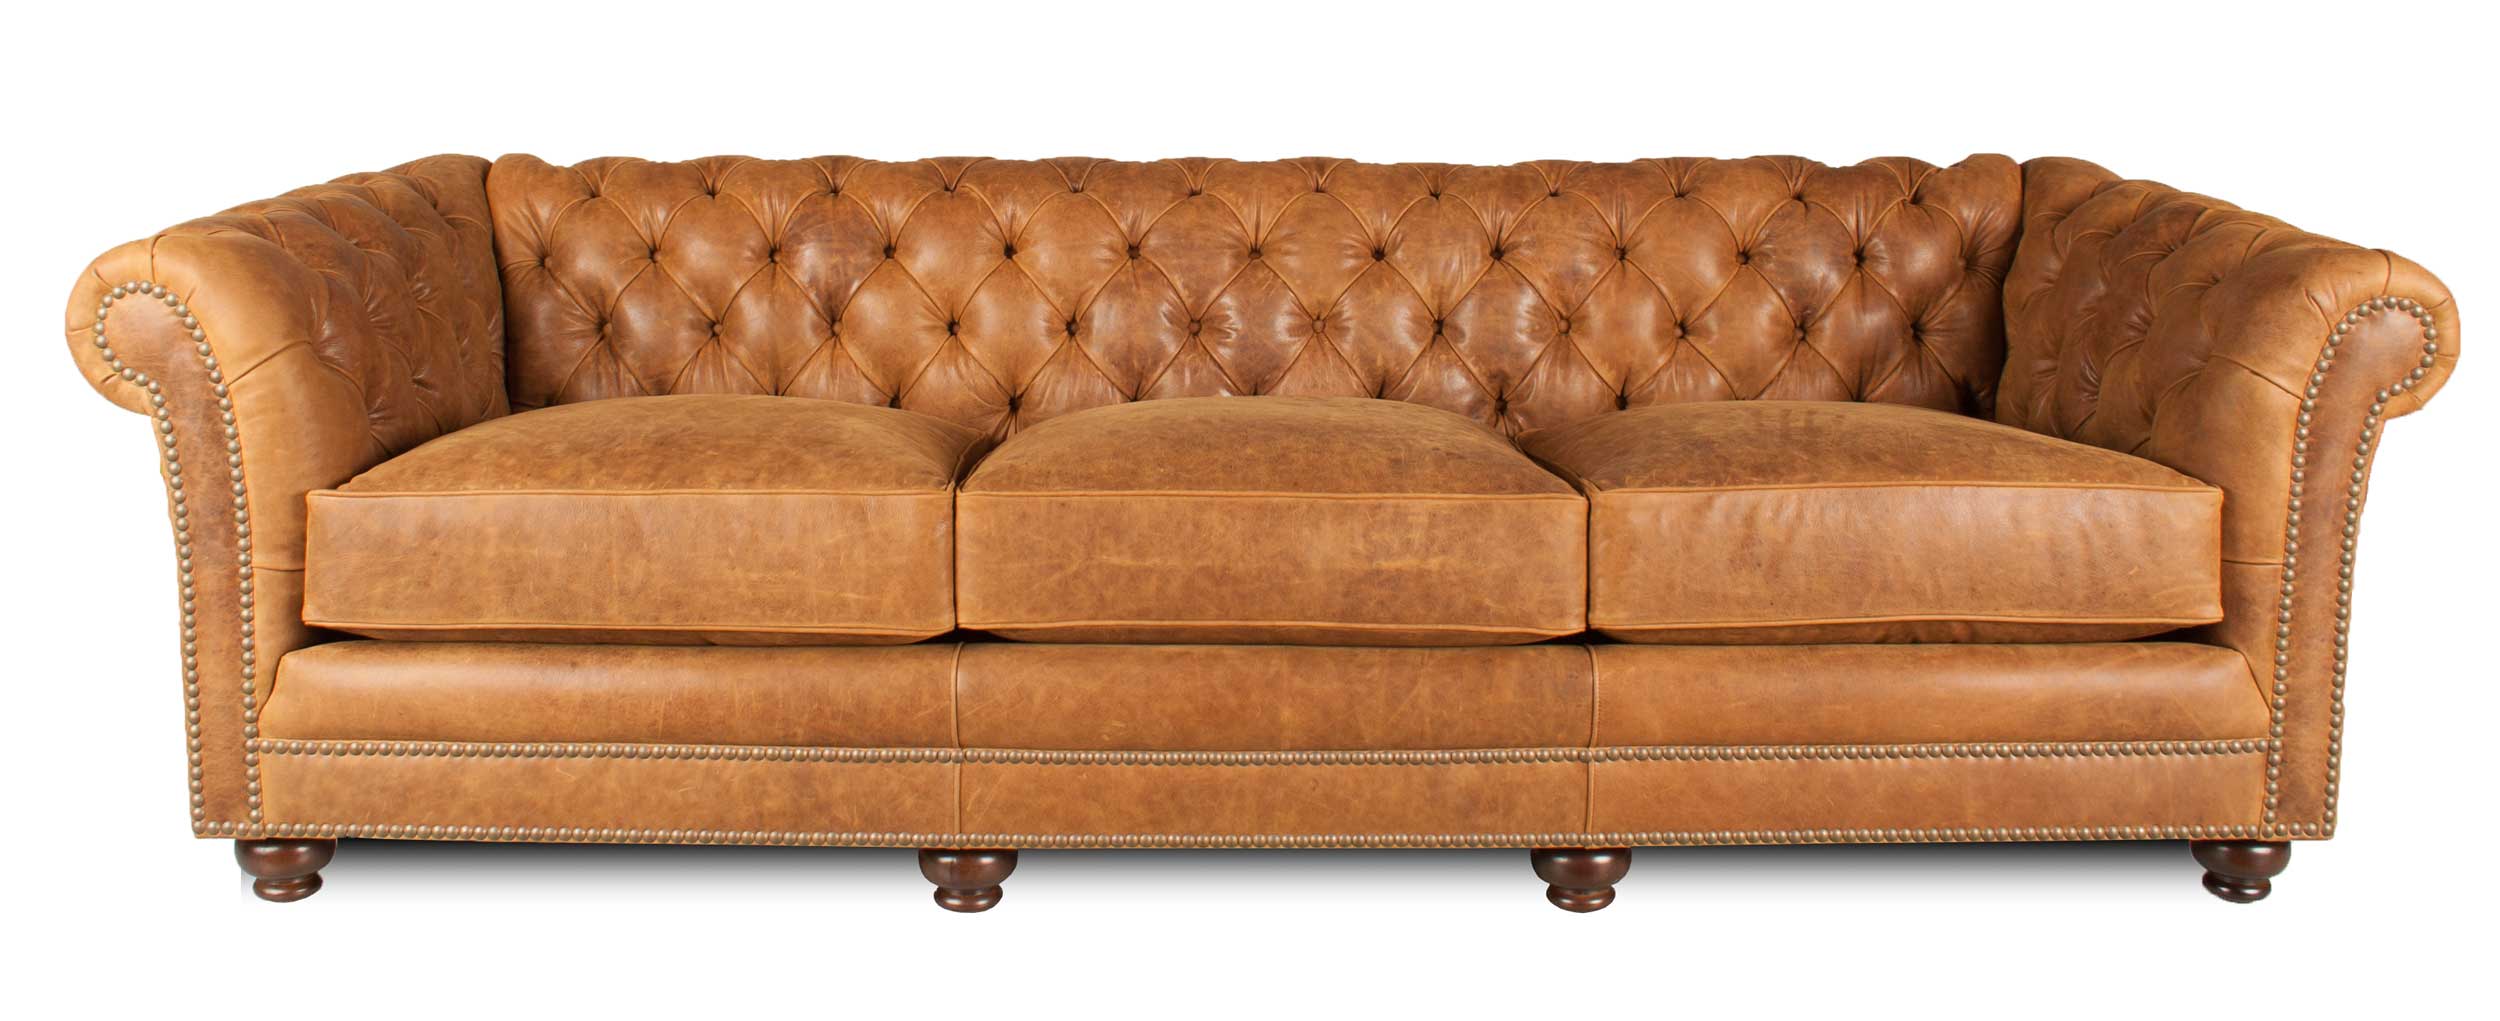 Deep Seated Sofas For The Big And Tall, Long Couches Leather